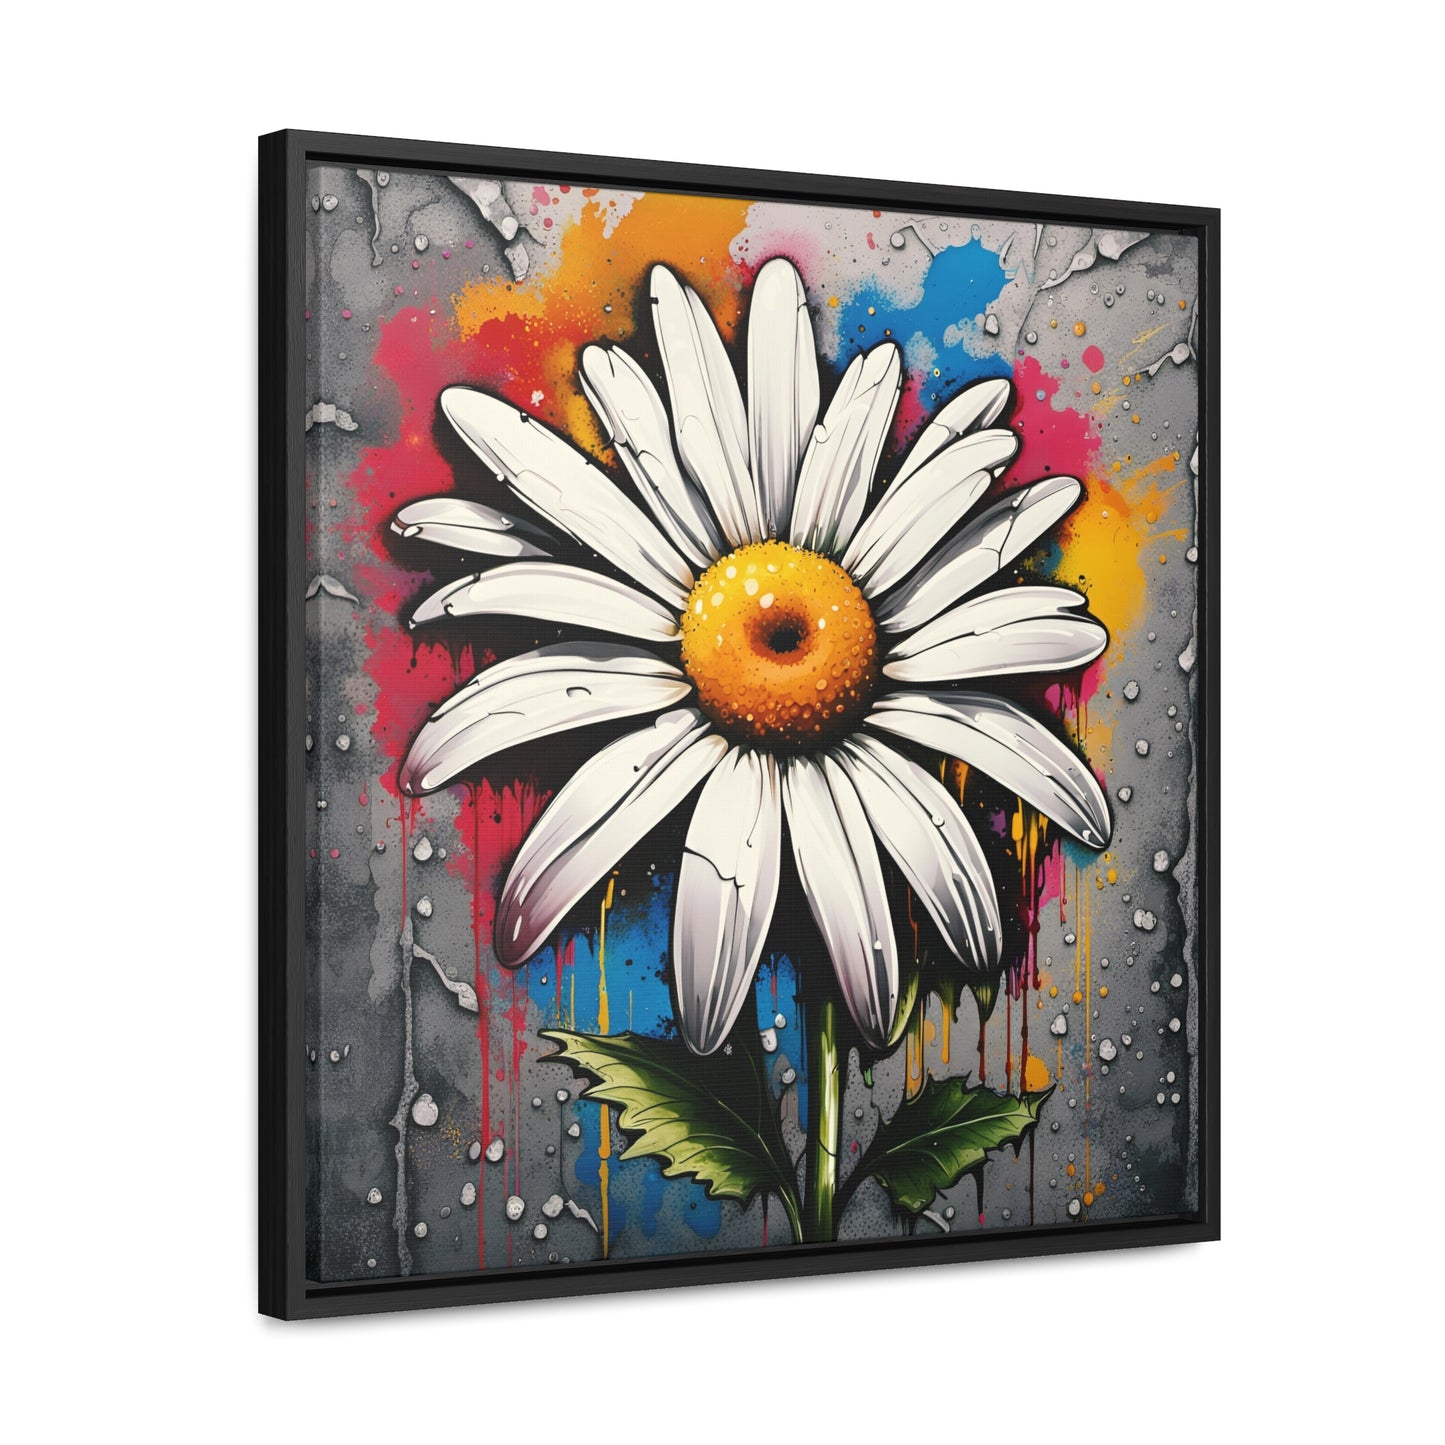 Floral themed Wall Art Print - Street Art Style Graffiti Daisy Printed on Canvas in a Floating Frame side view